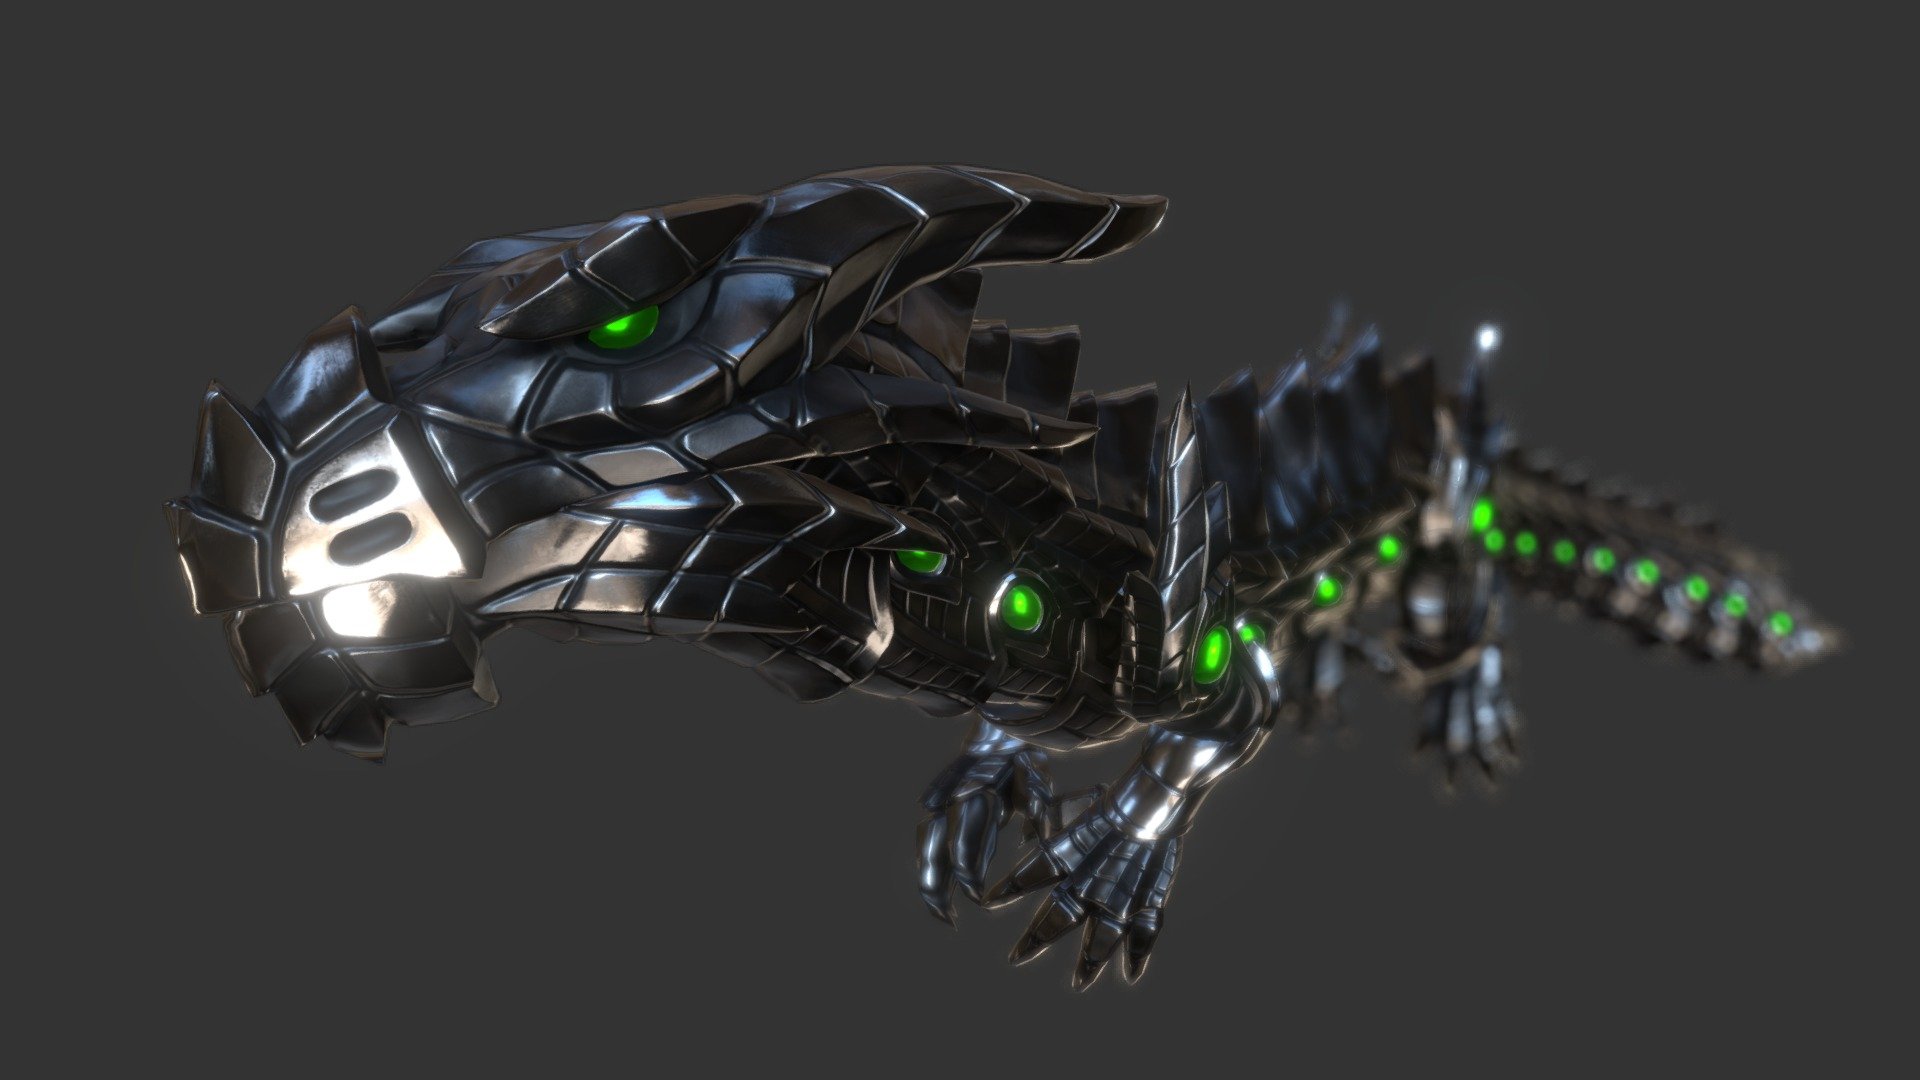 An armored dragon made for the VR game Space Dragon.

Model, texture, and animation by Cordelia Wolf. This model can be found in Space Dragon on Oculus and Steam 3d model